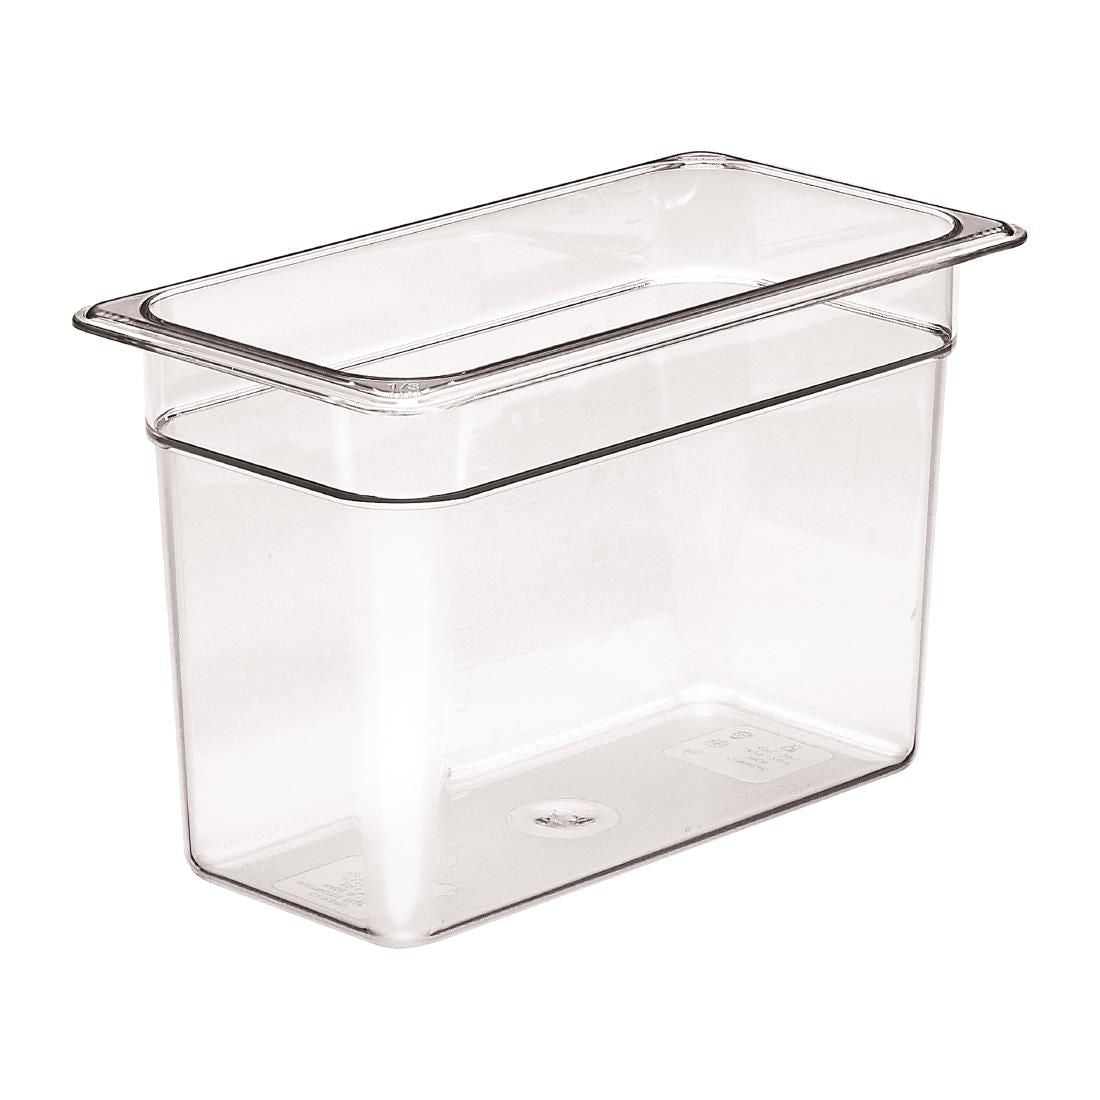 DM736 Cambro Polycarbonate 1/3 Gastronorm Pan 200mm JD Catering Equipment Solutions Ltd